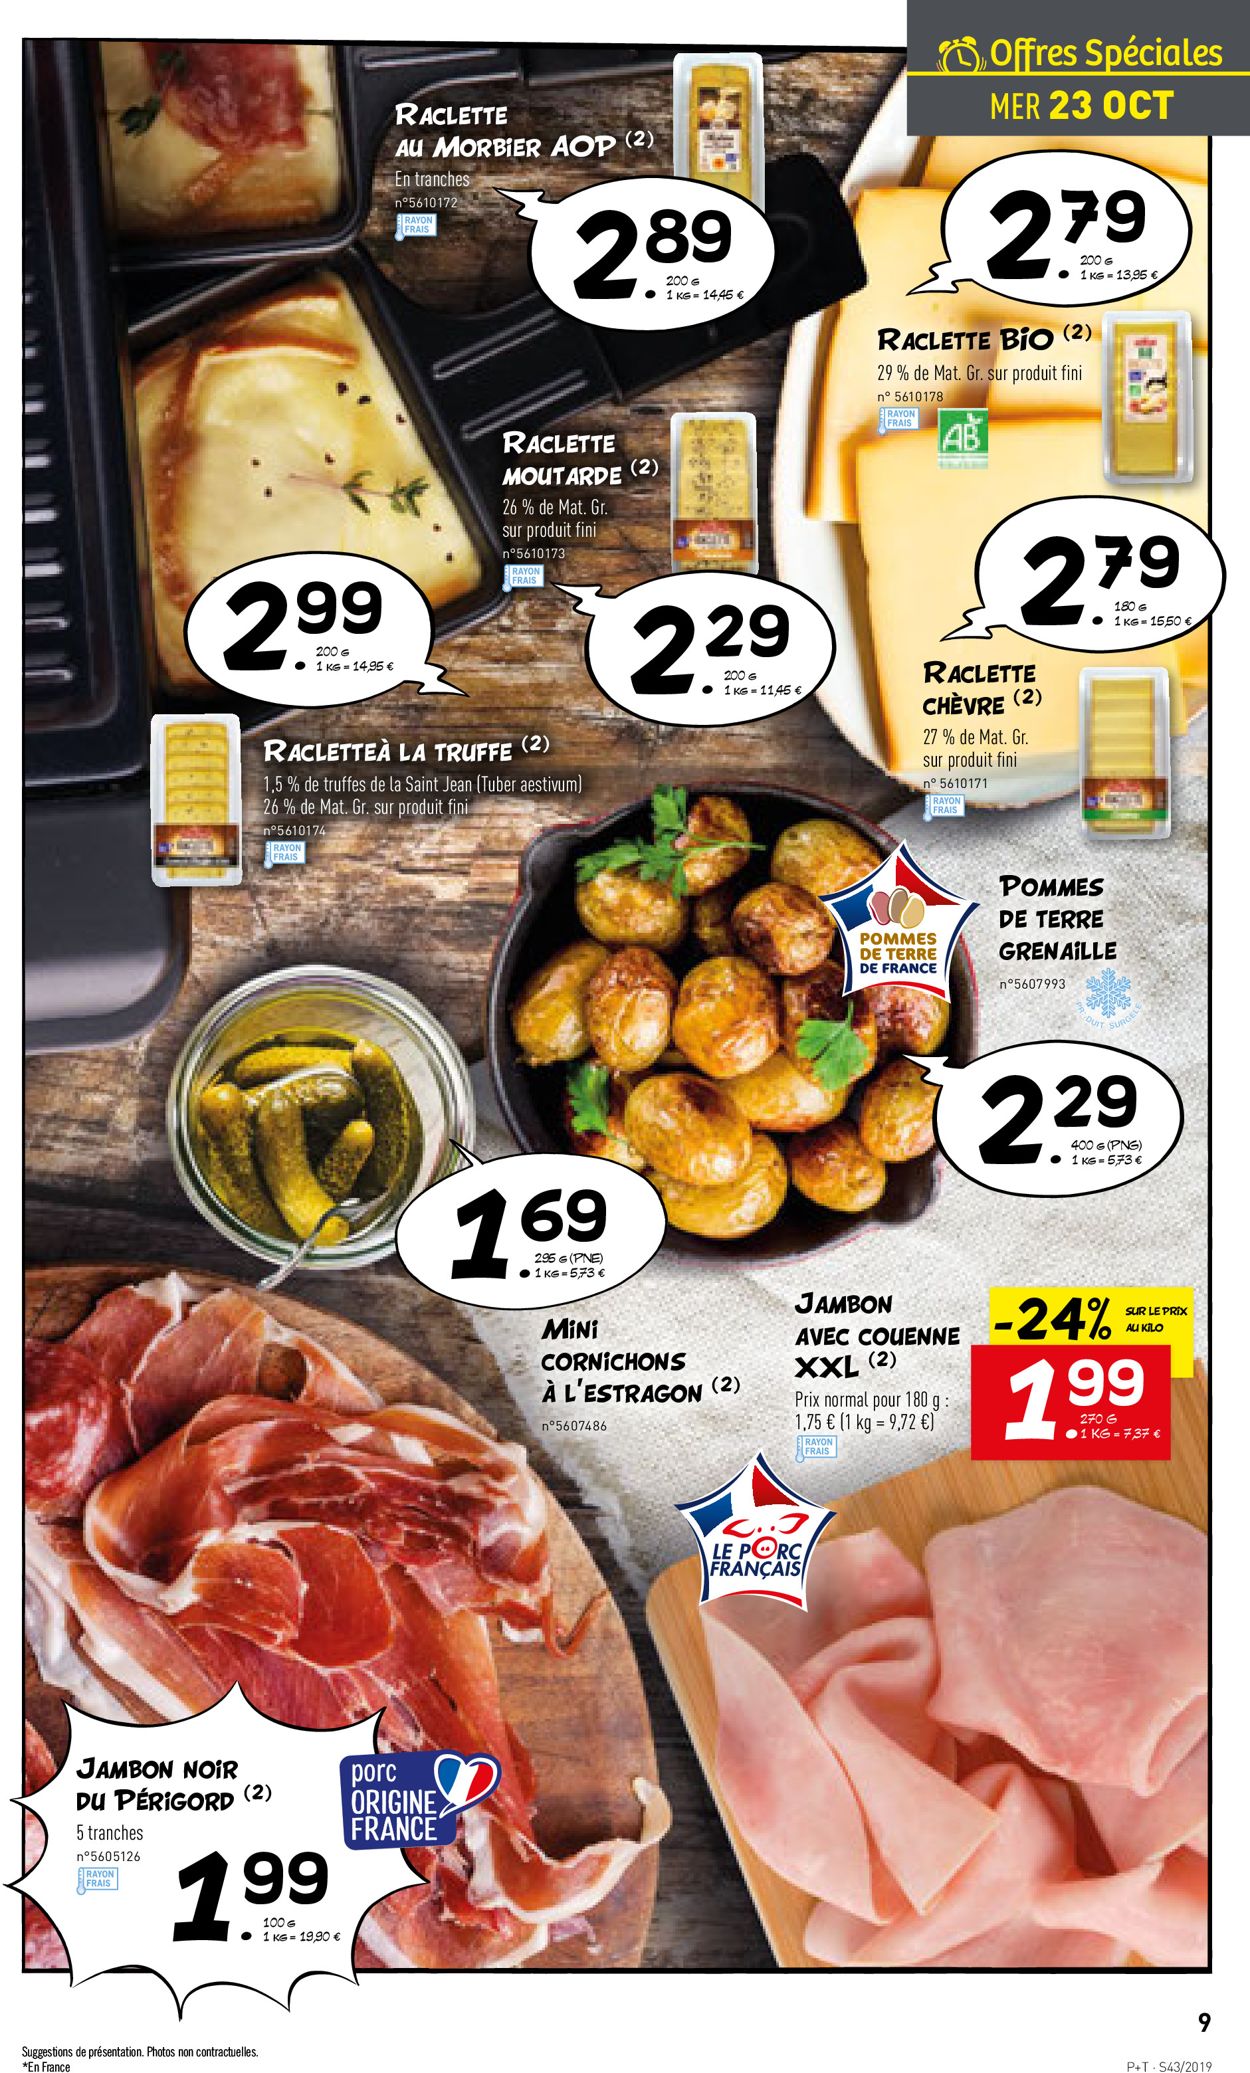 Lidl Catalogue - 23.10-29.10.2019 (Page 9)